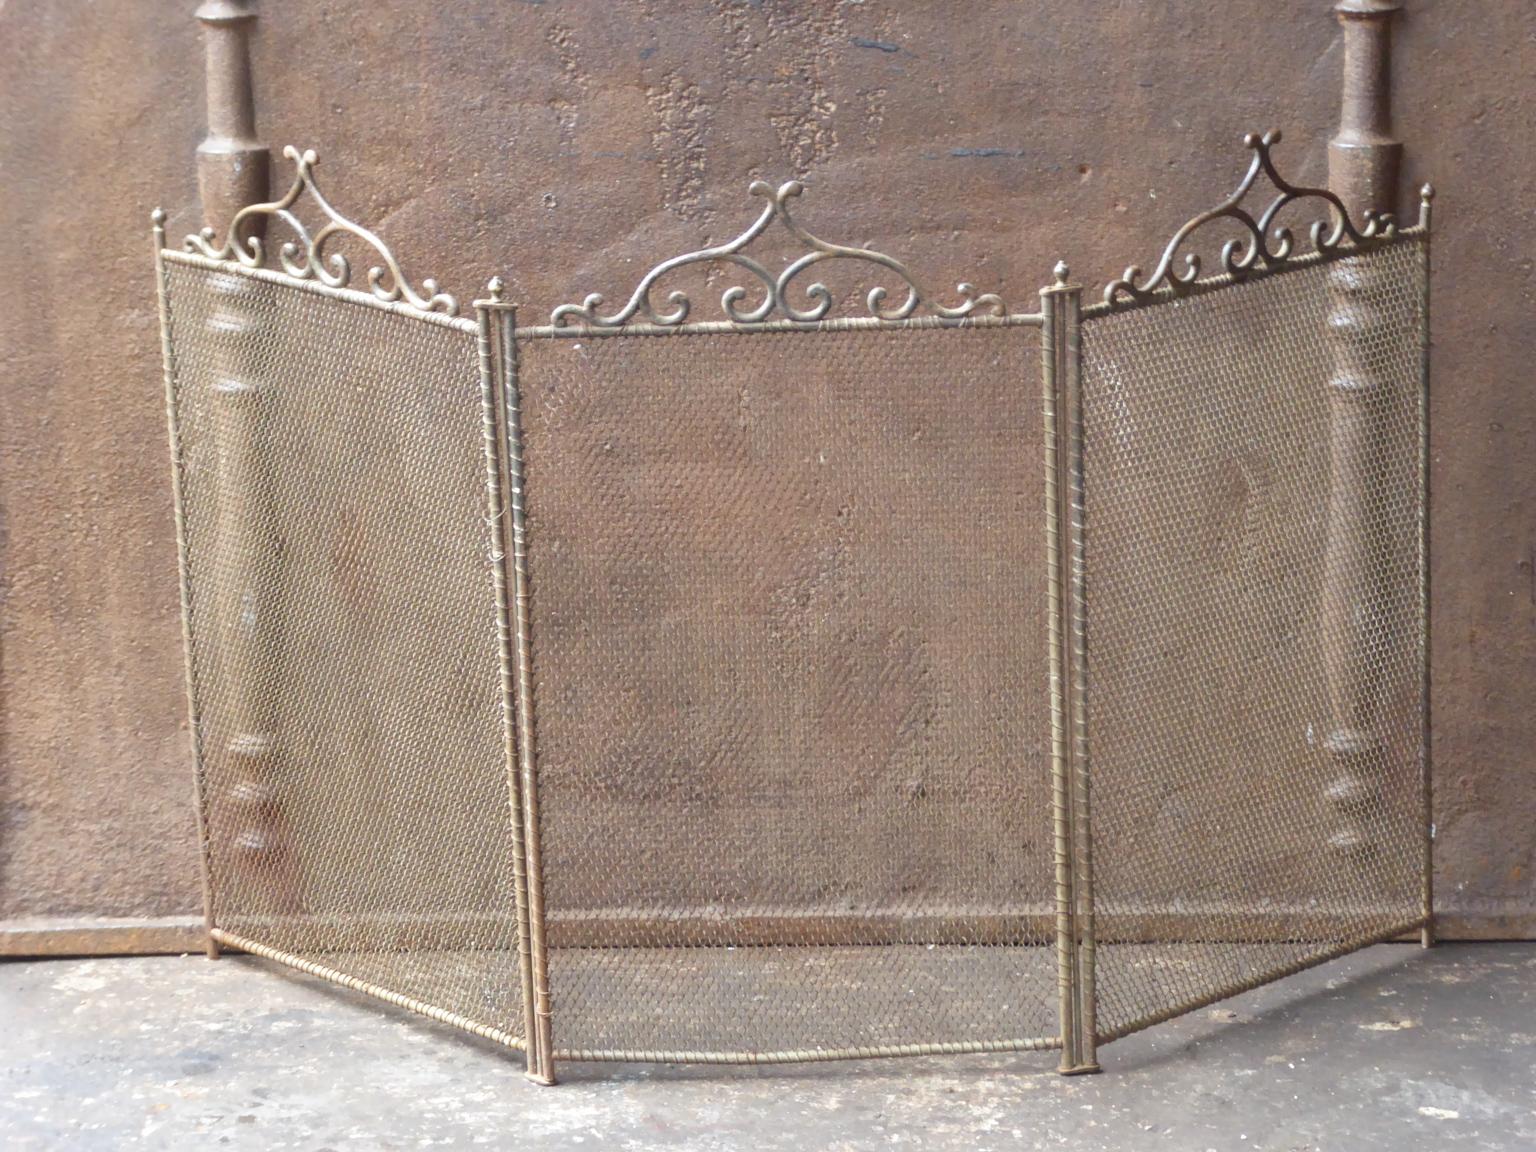 19th century French Napoleon III three-panel fireplace screen. The screen is made of iron and iron mesh. It is in a good condition and is fit for use in front of the fireplace.